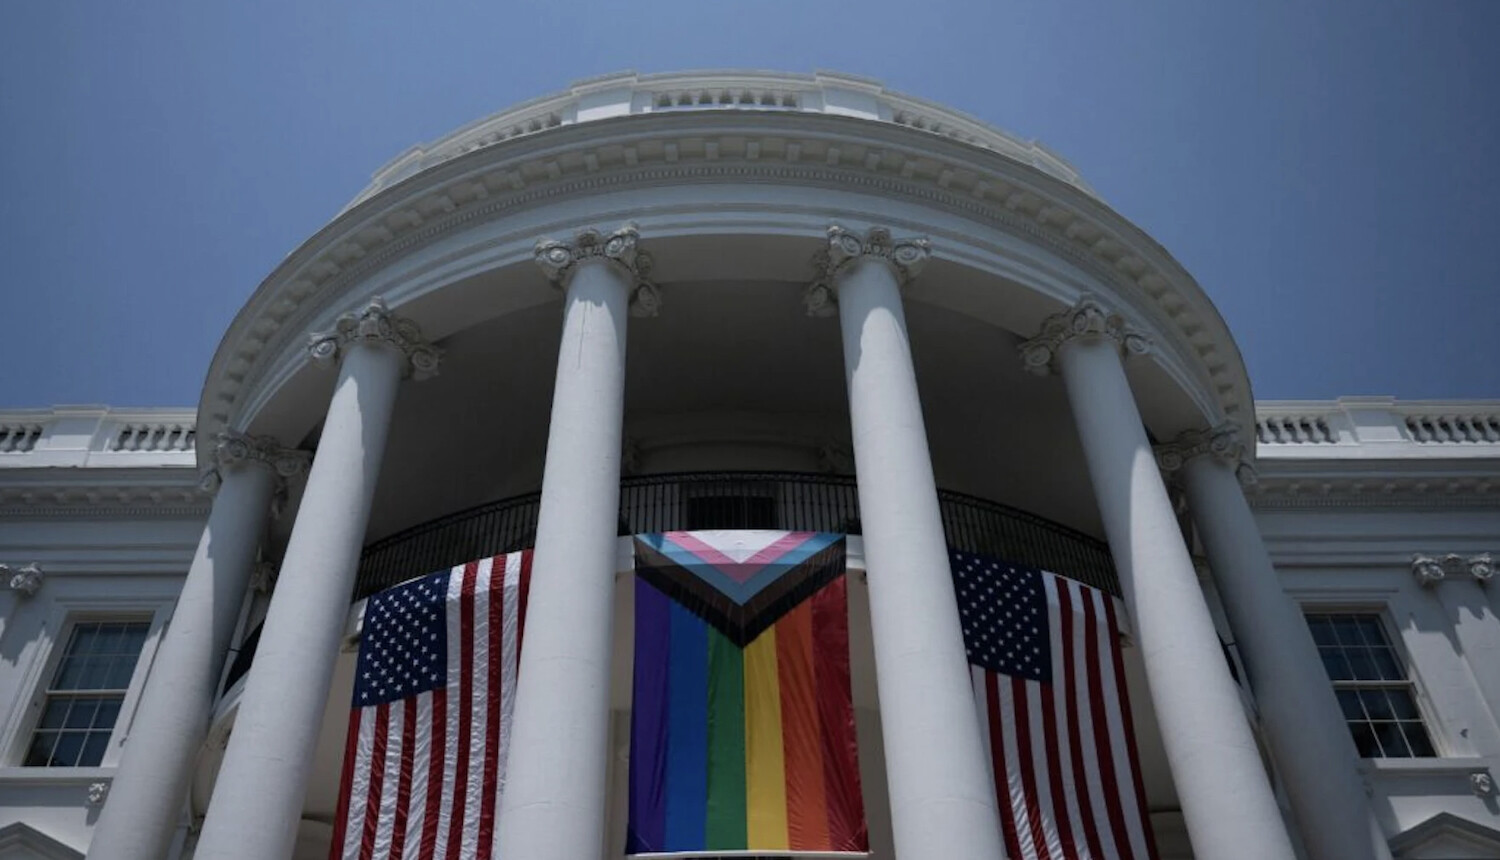 The White House with the US and LGBT flags. Photo: dailywire.com